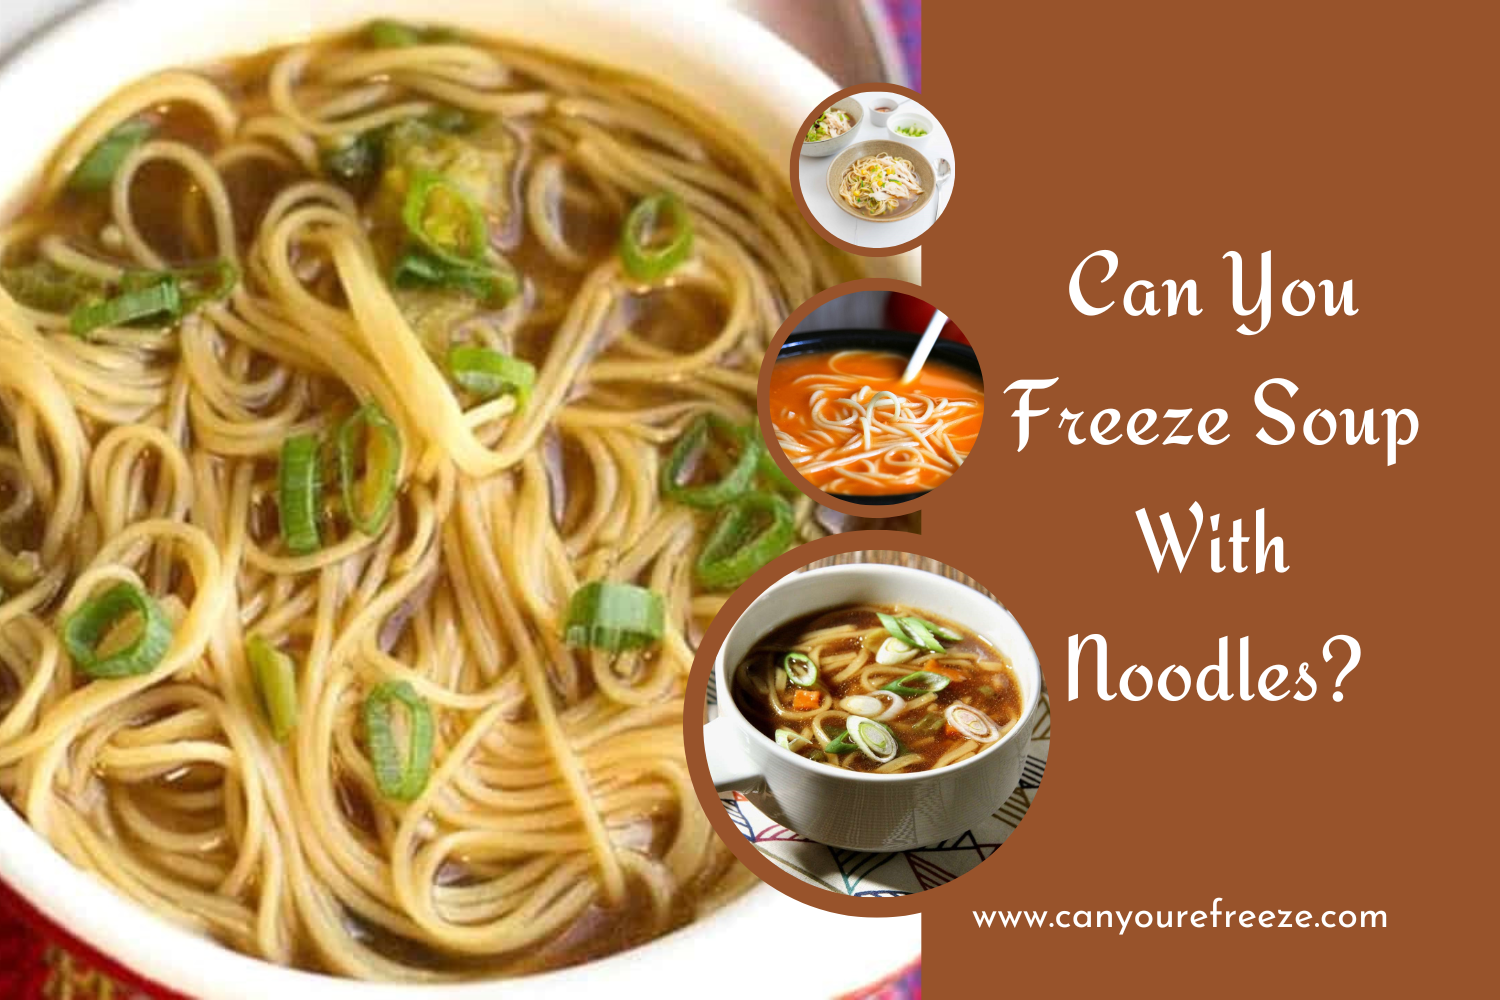 Can You Freeze Soup With Noodles